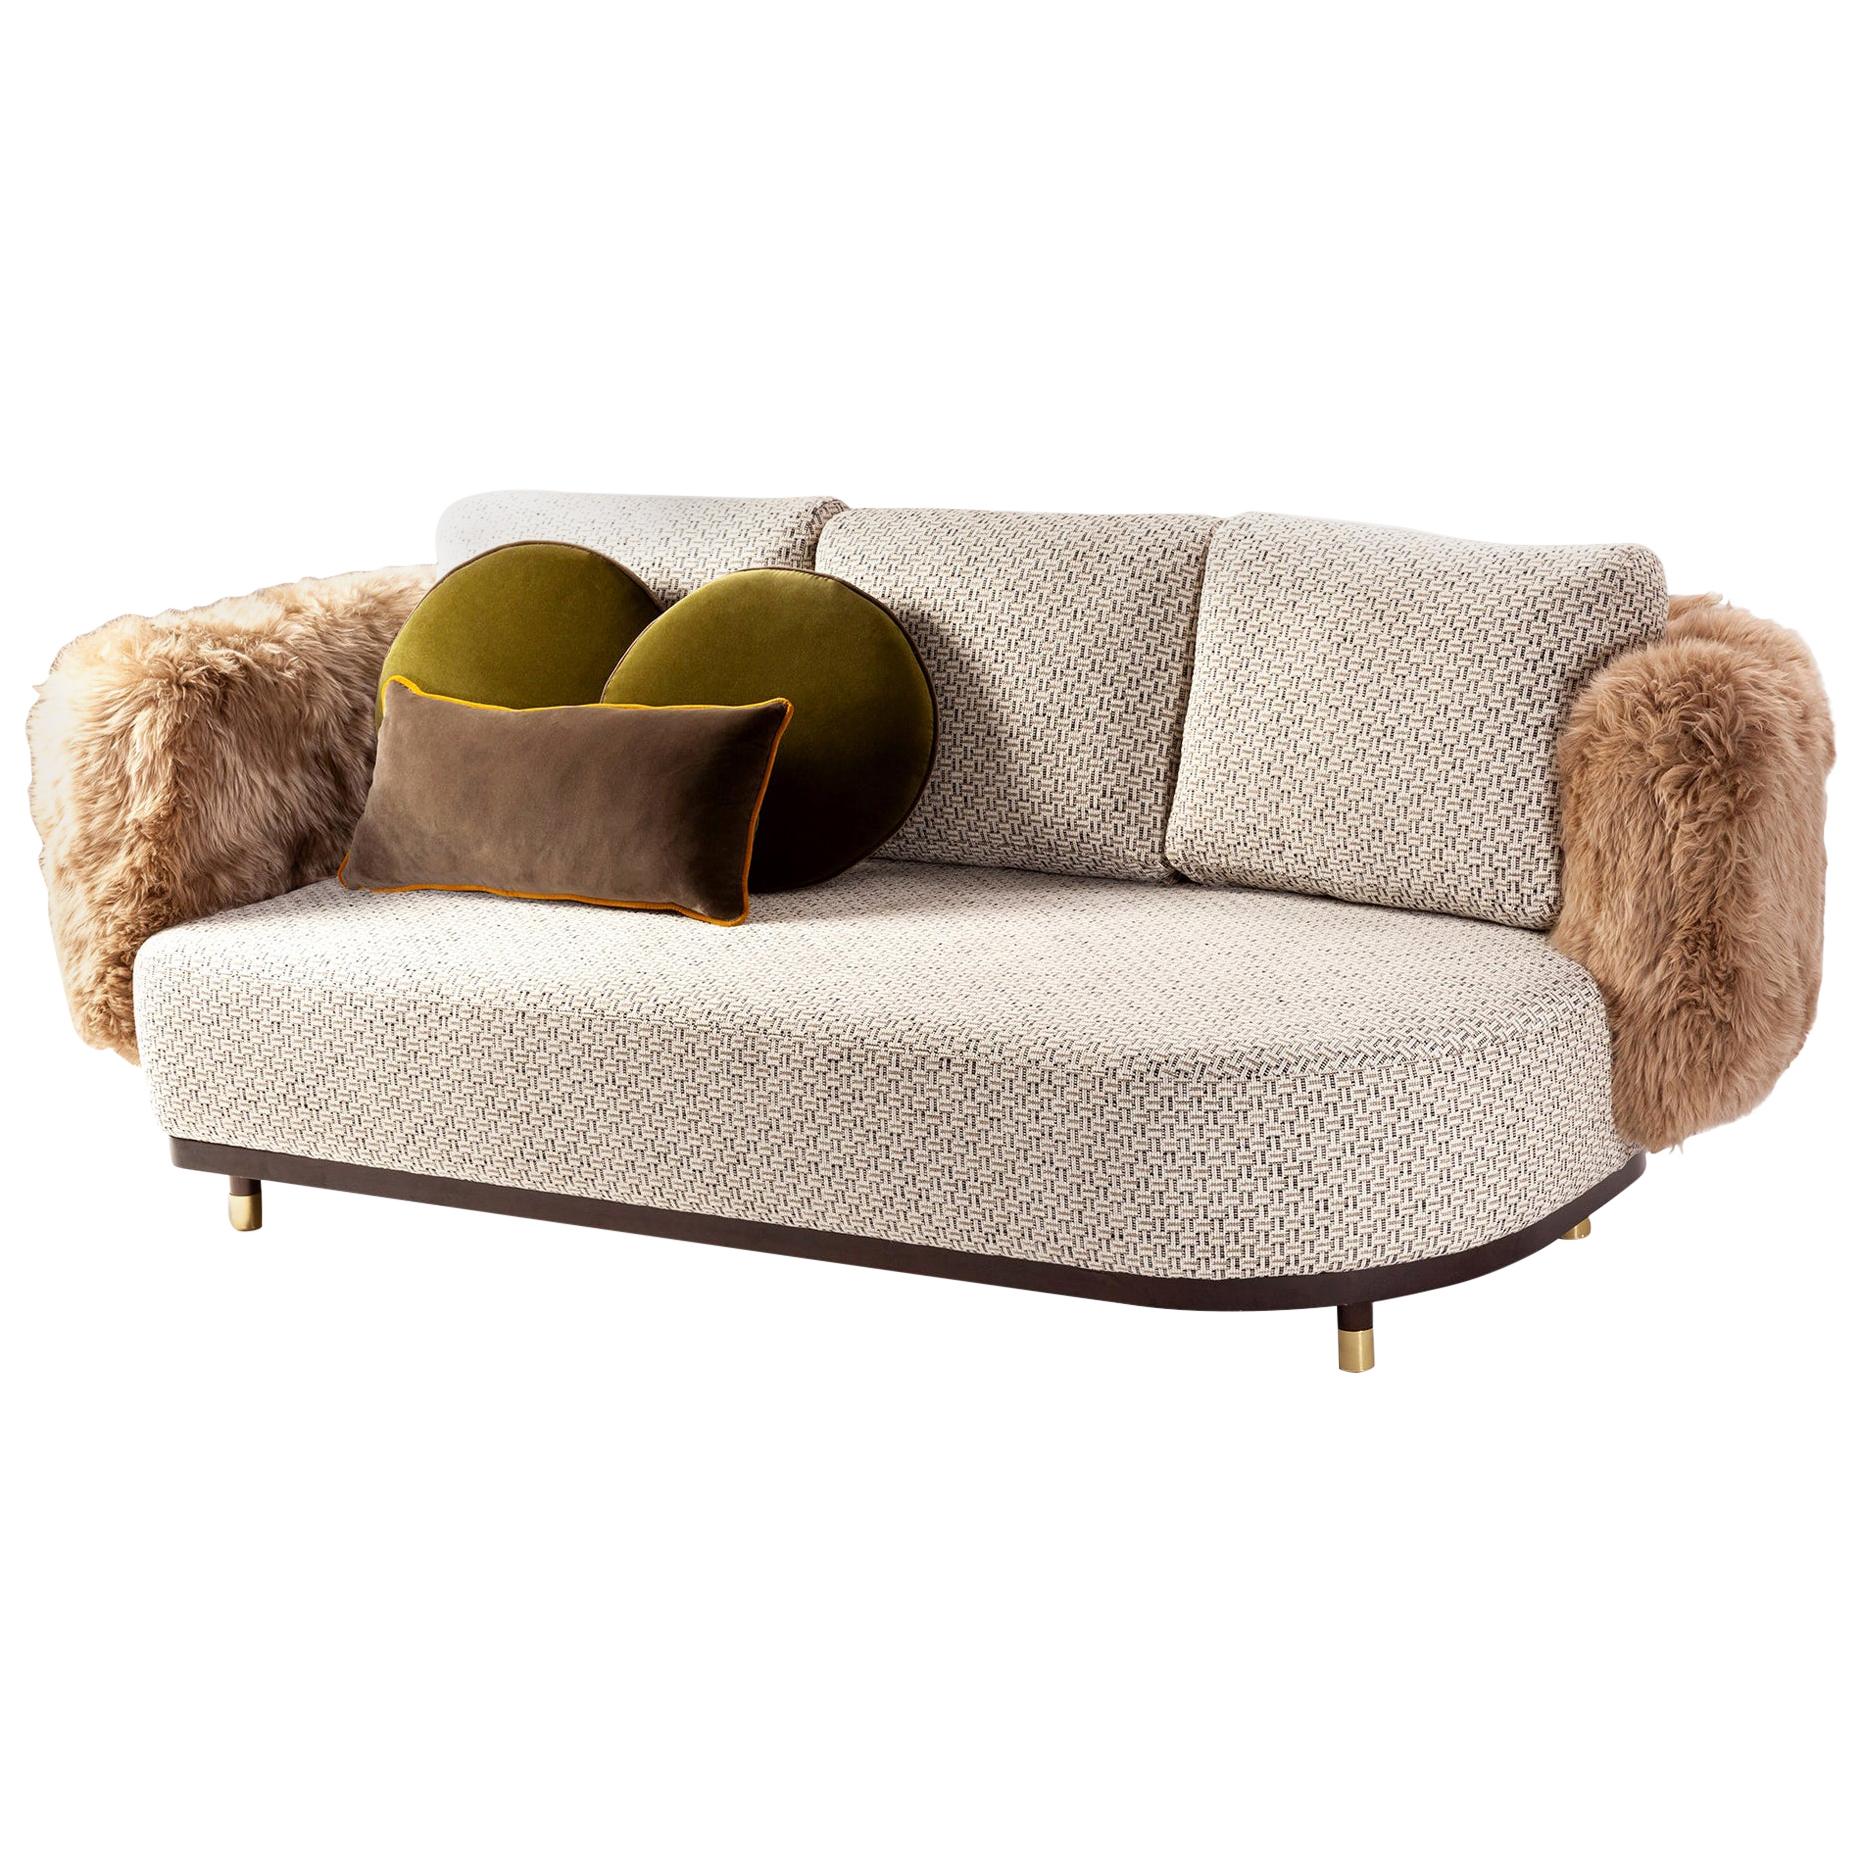 DOOQ Sofa Settee with Weaved Texture and Lamb Fur Single Man, width 280 For Sale